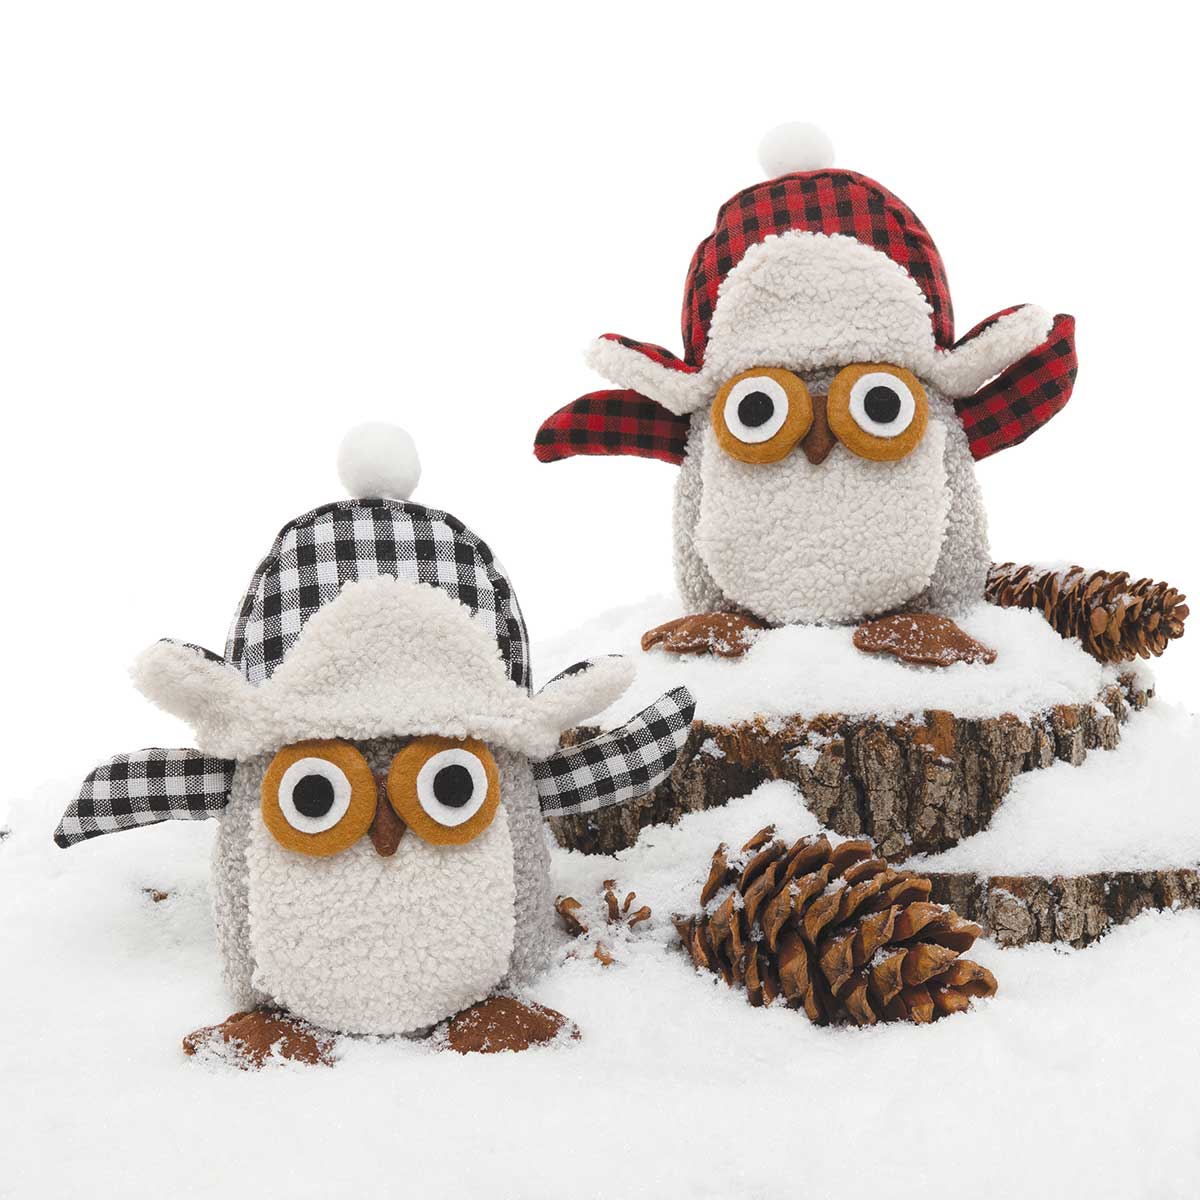 OWL WINTER CRITTER 2 ASSORTED 9IN X 4.5IN X 7.75IN RED/WHITE PLA